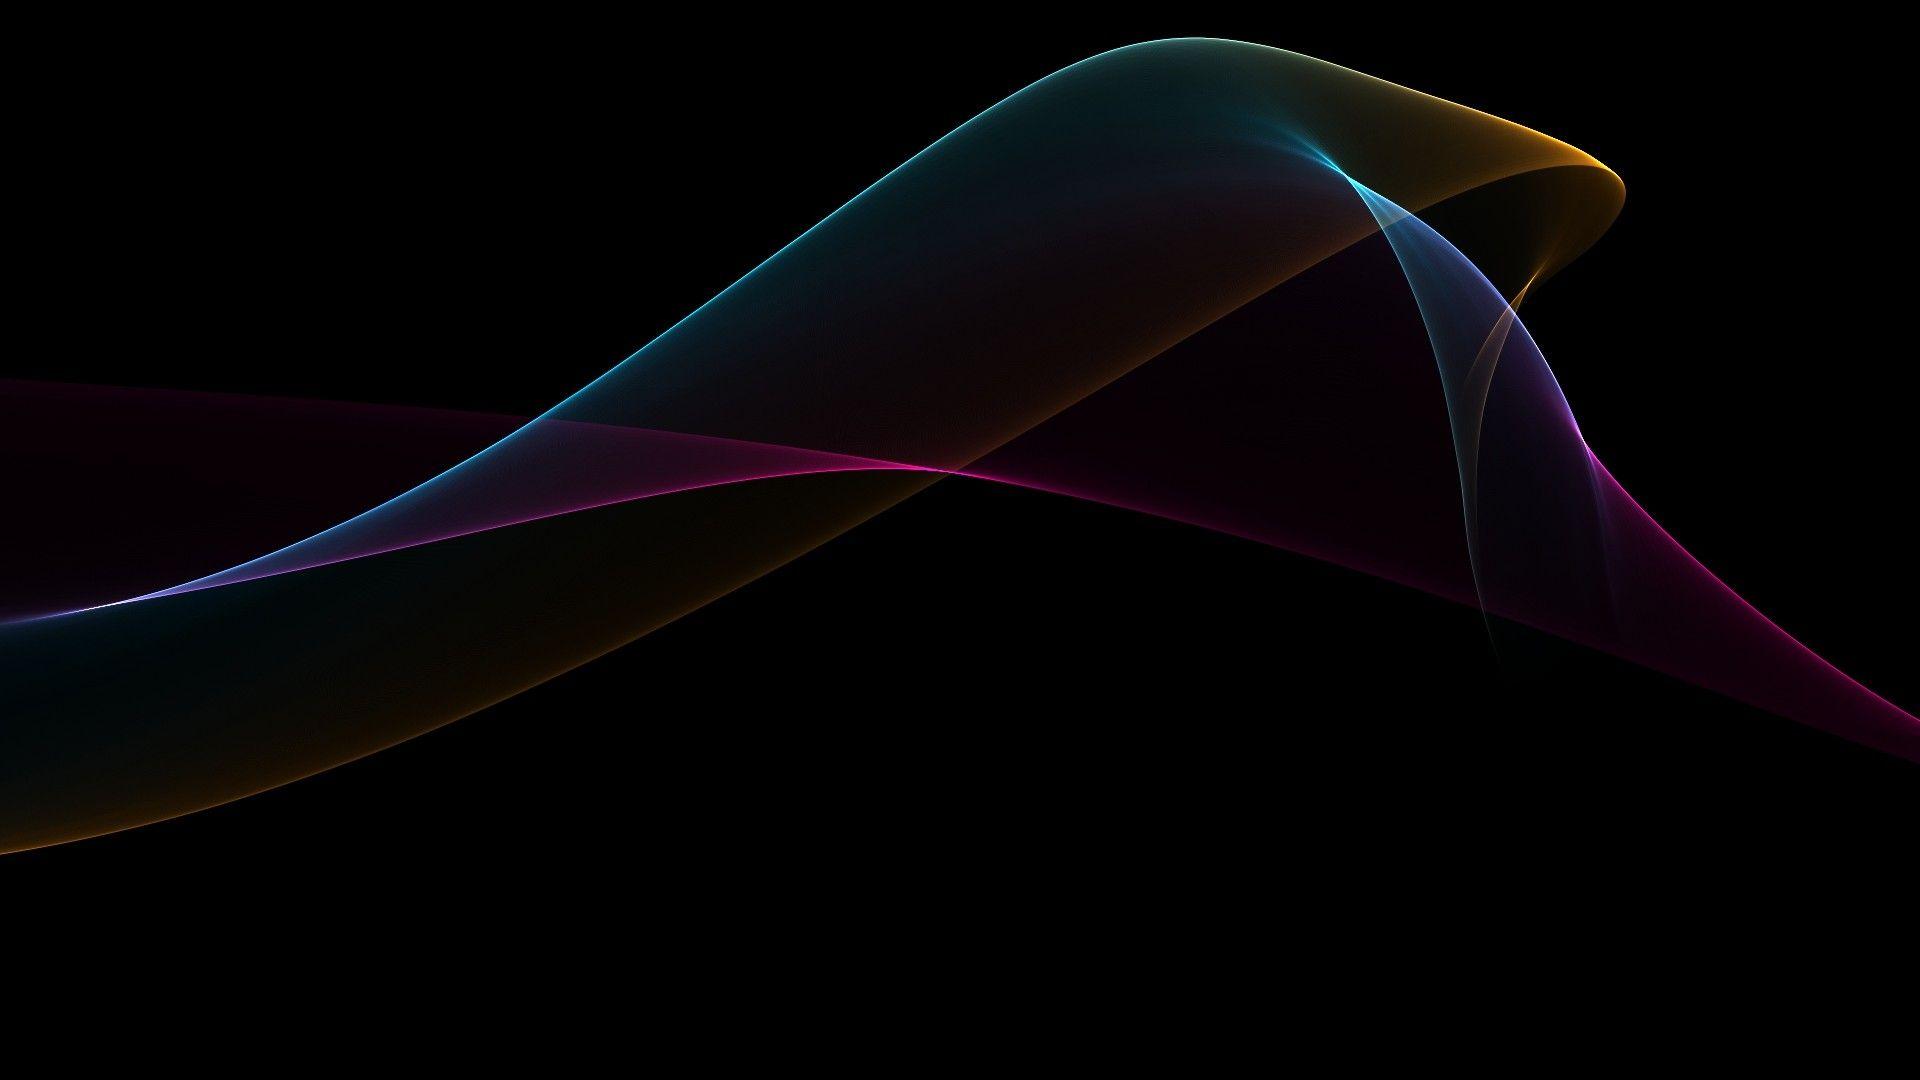 Abstract, Download Black Abstract Wallpaper 1920x1080 High